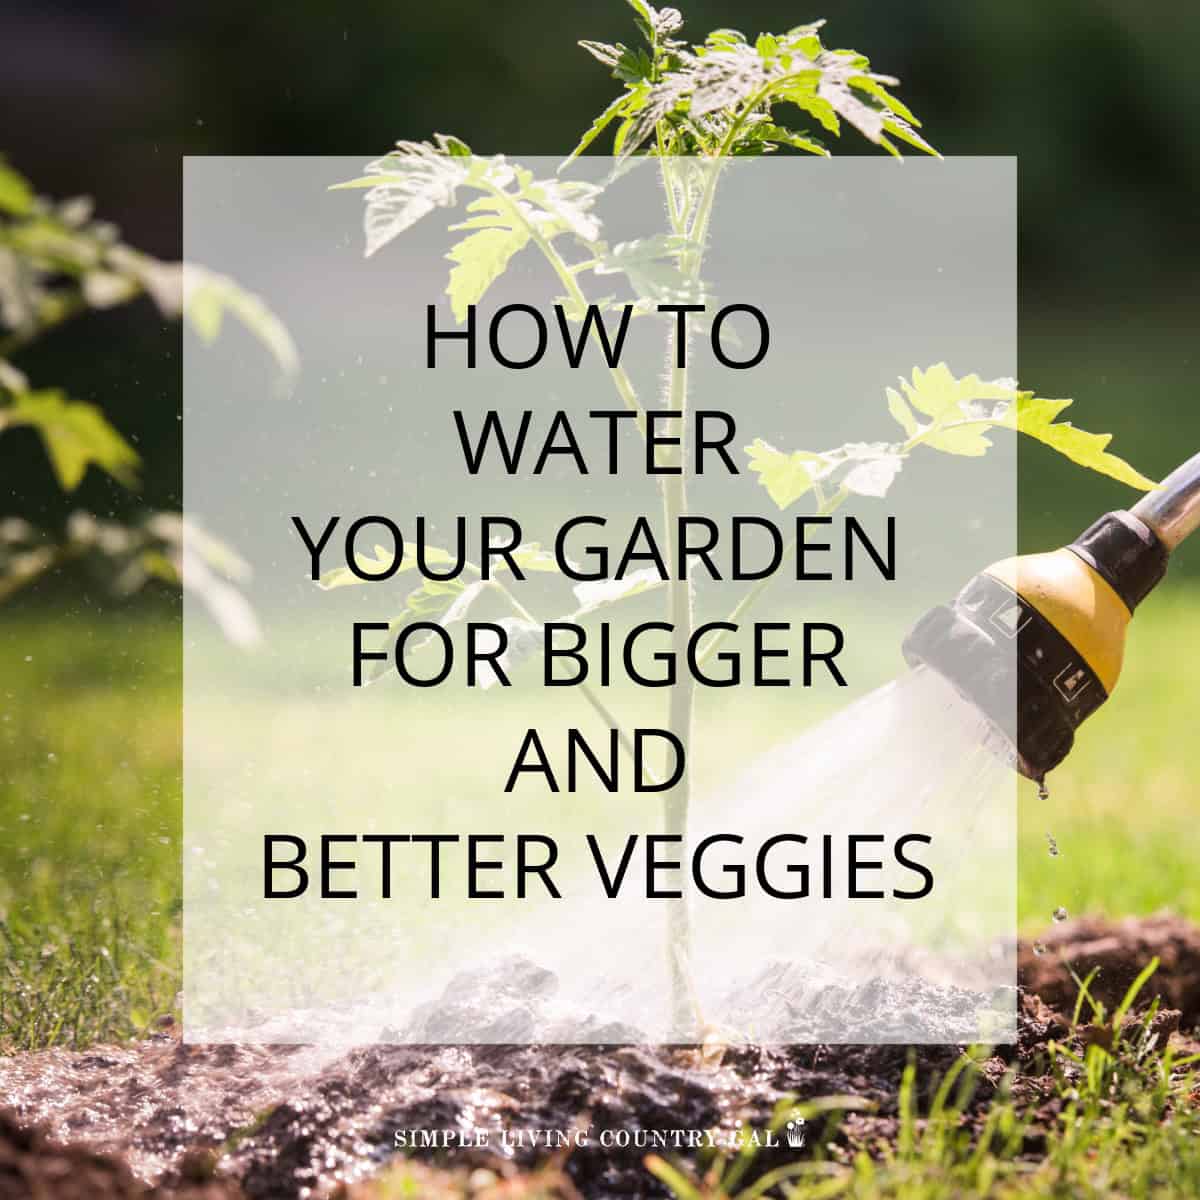 How to water your garden